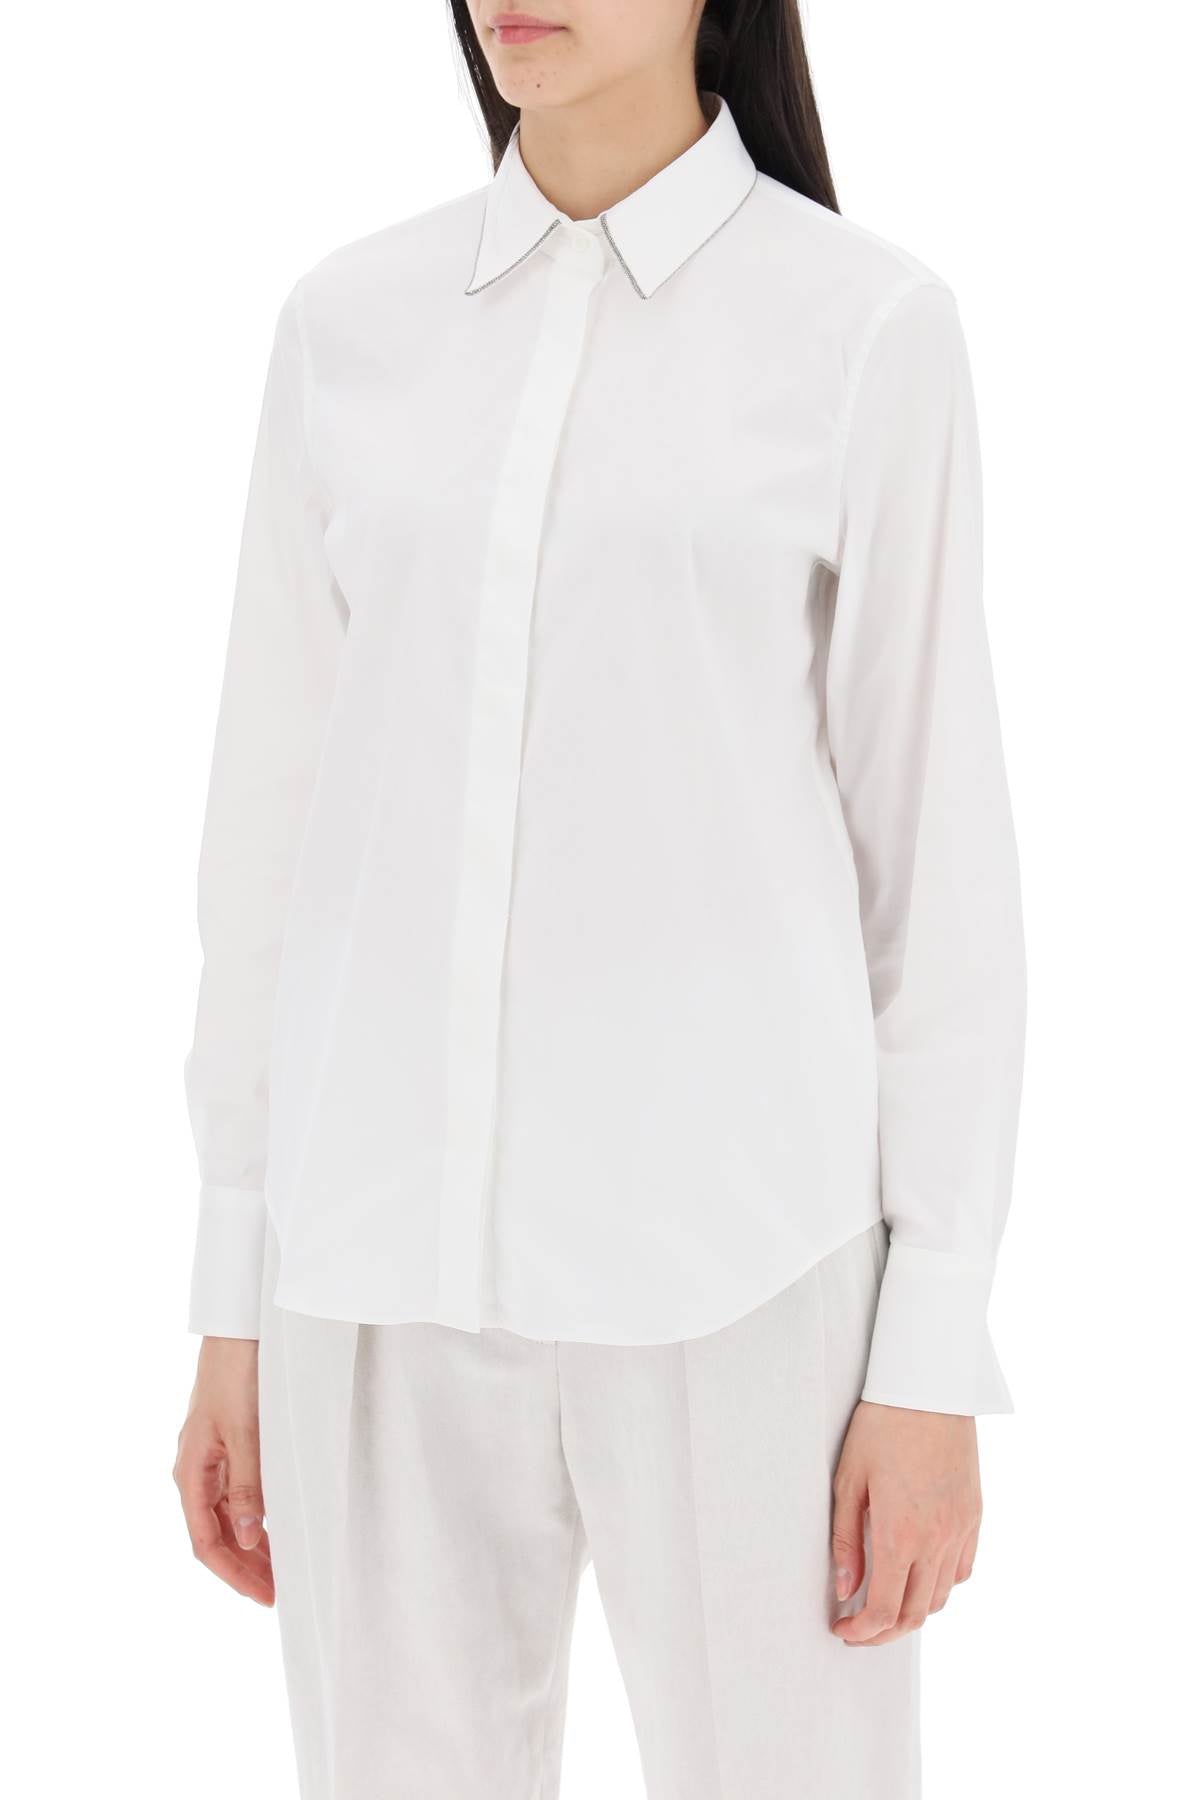 Brunello cucinelli "shirt with shiny-3